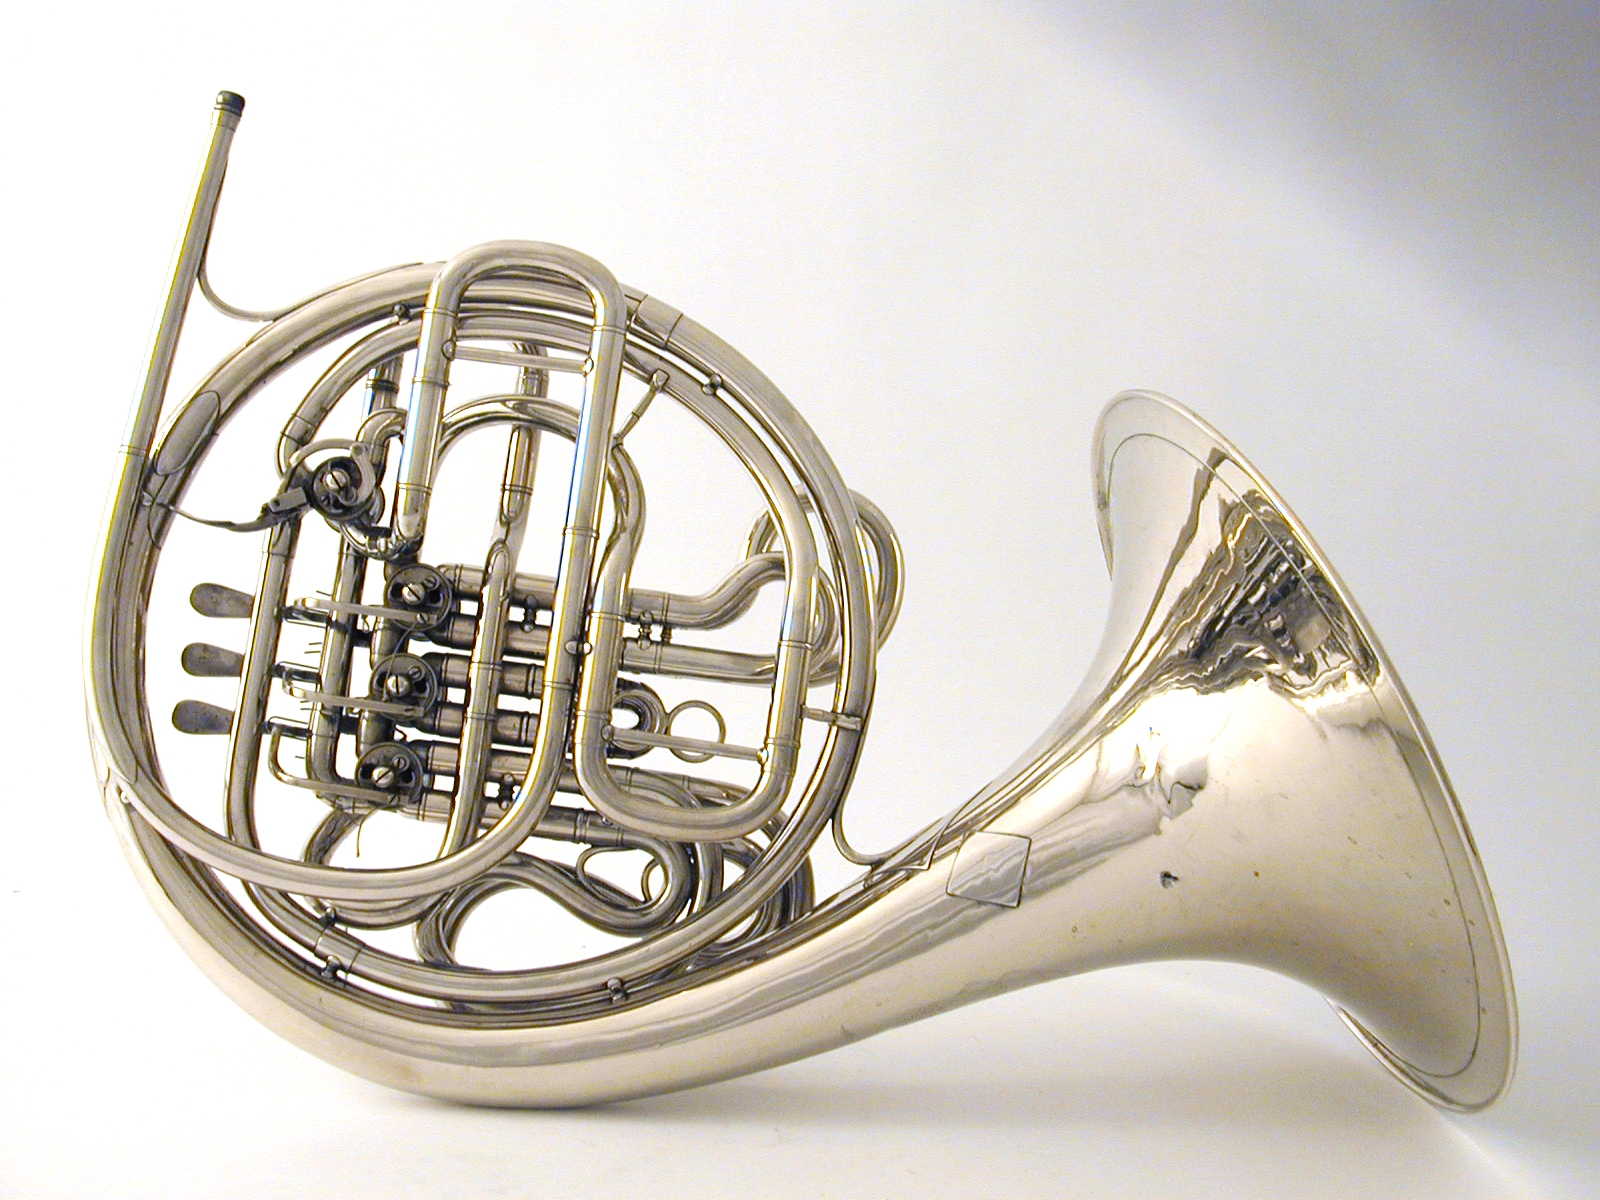 French horn HD Wallpaper